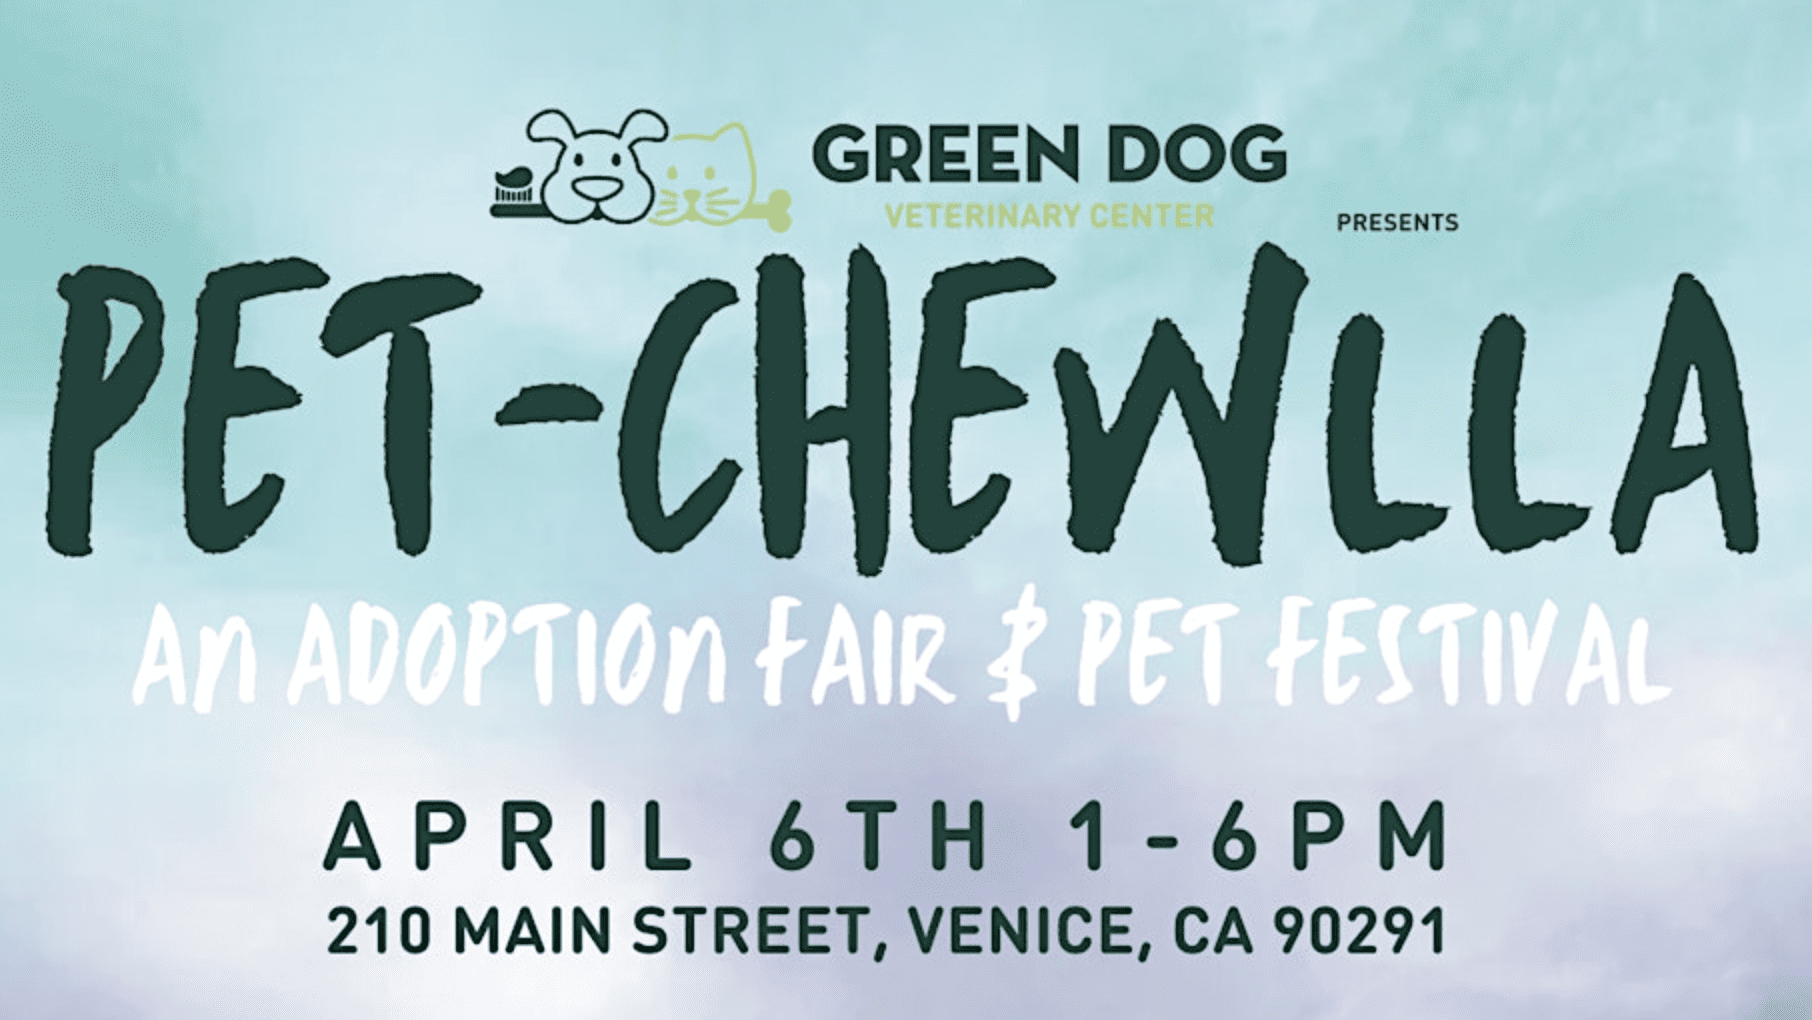 Join us for a day of canine fun at the Pet-Chewlla event